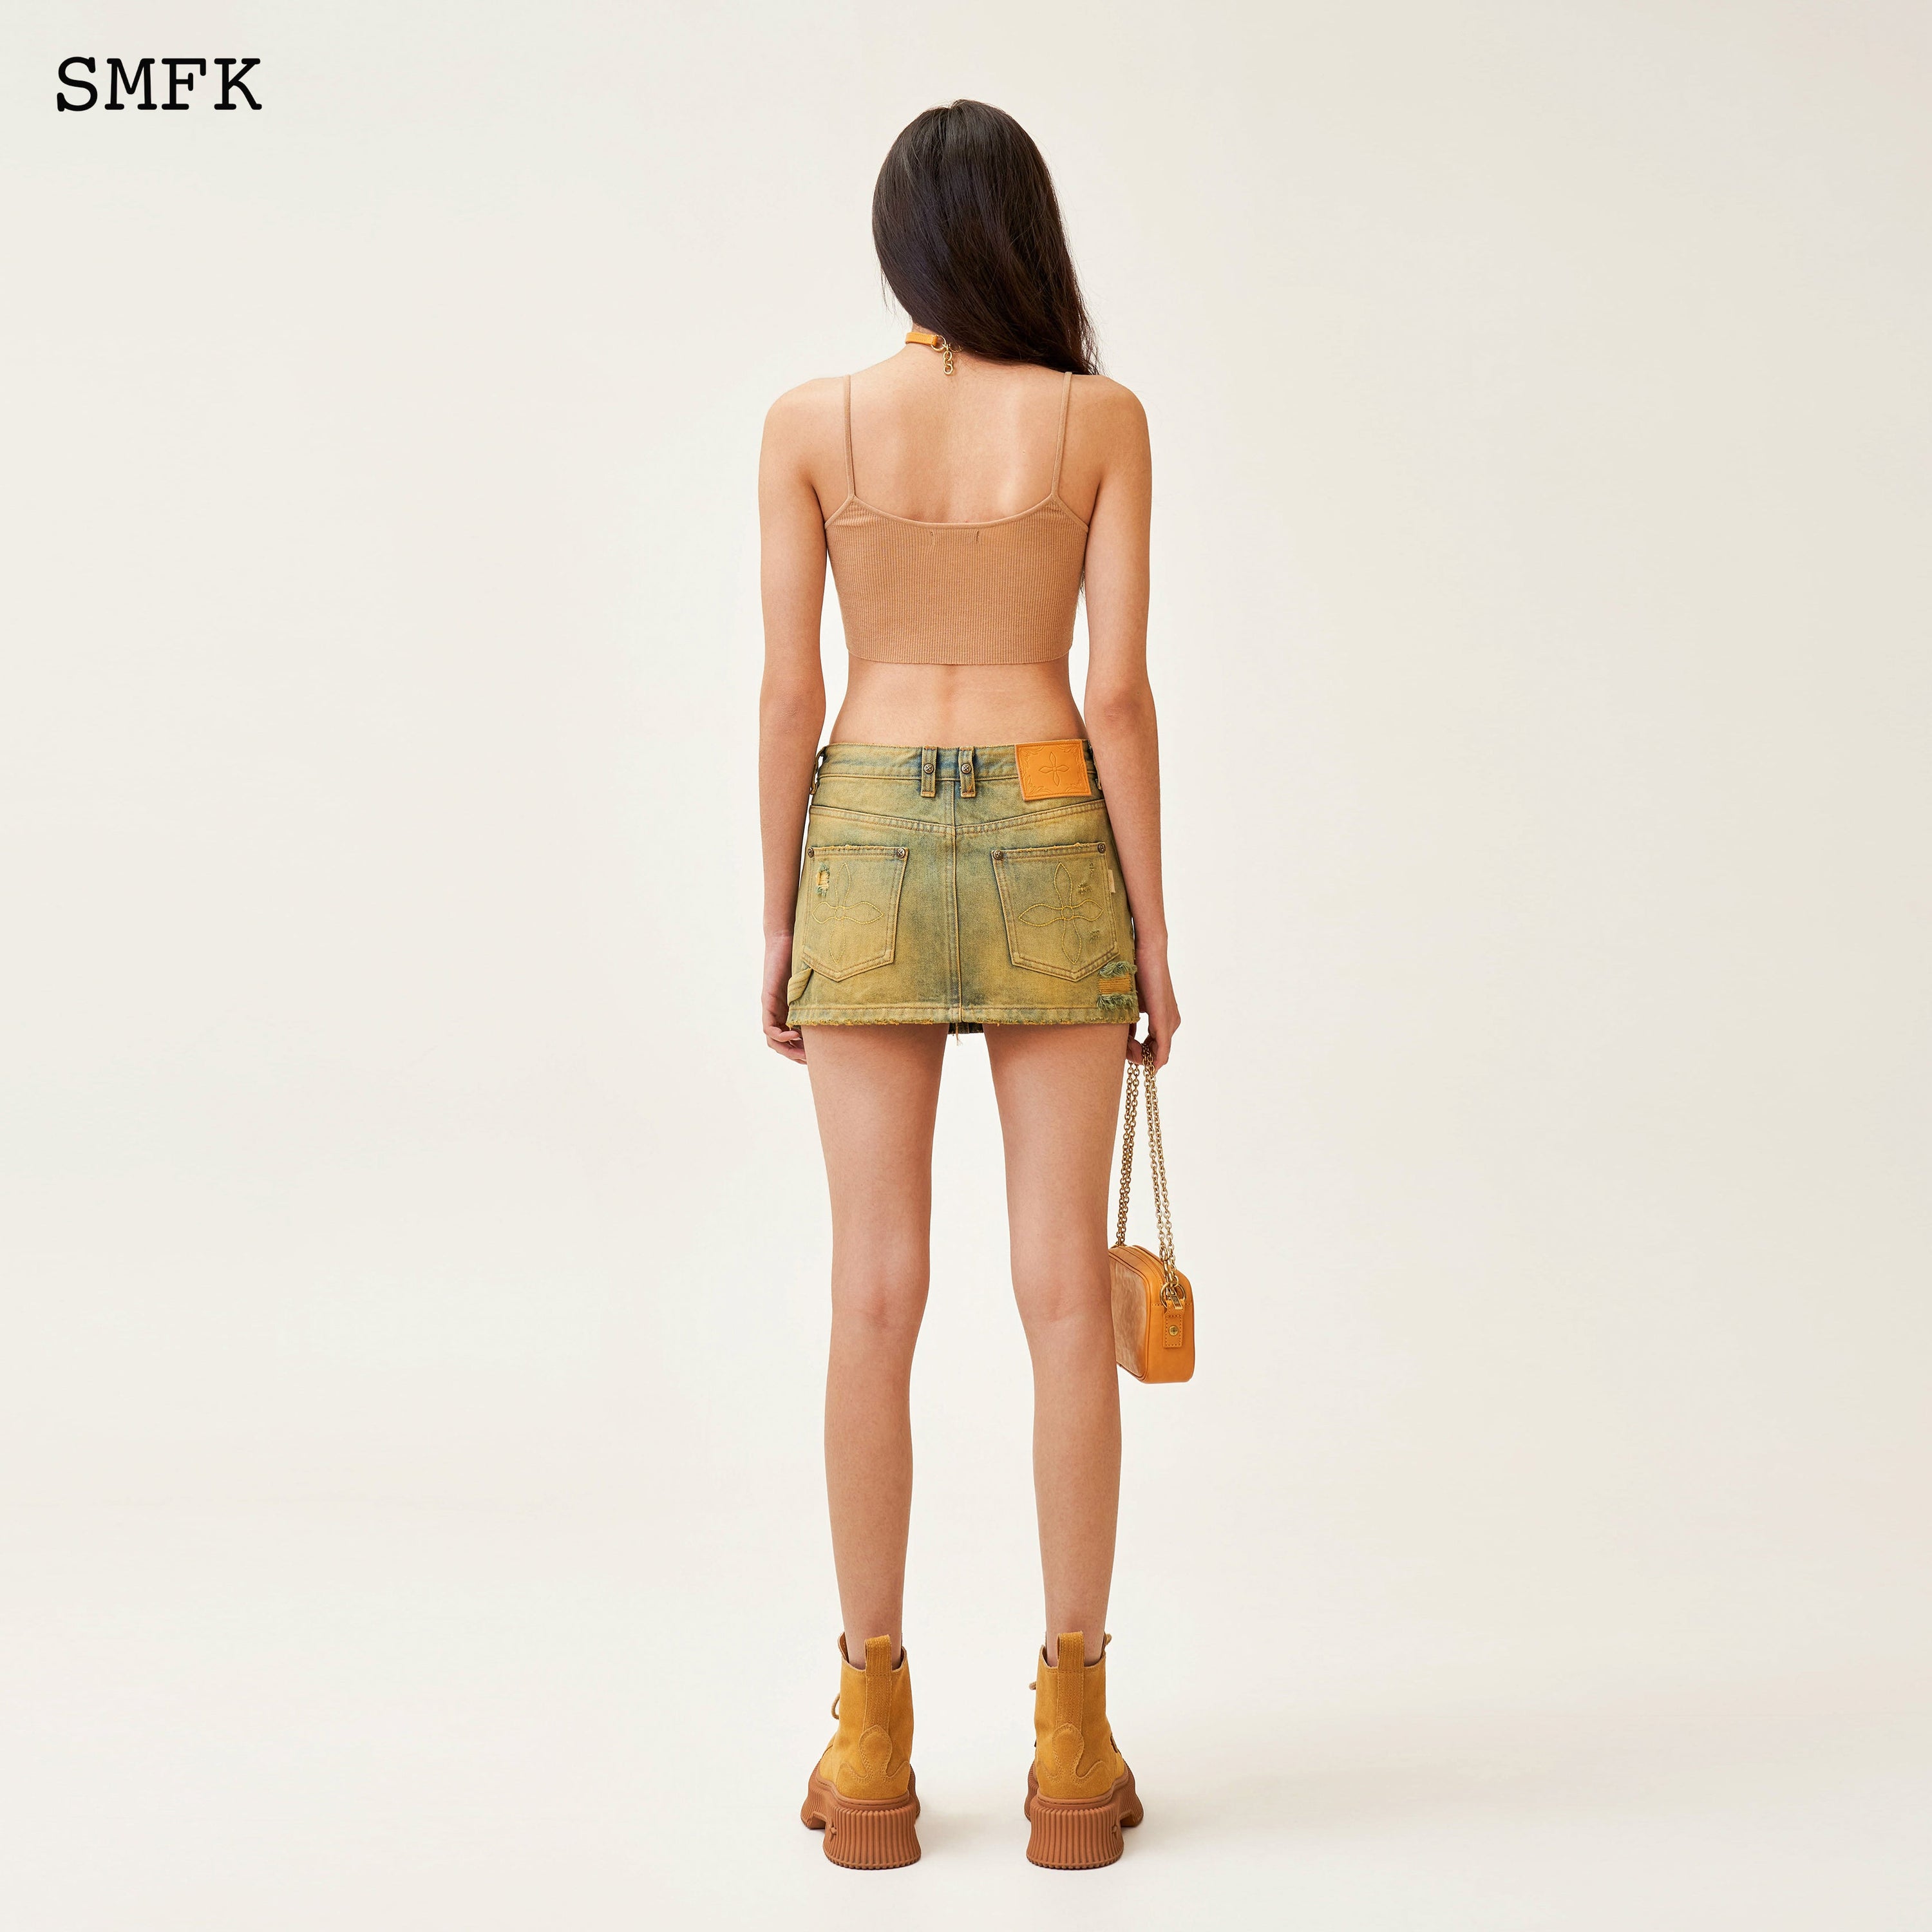 Compass Cross Classic Knitted Ultra Short Vest Top Nude - SMFK Official